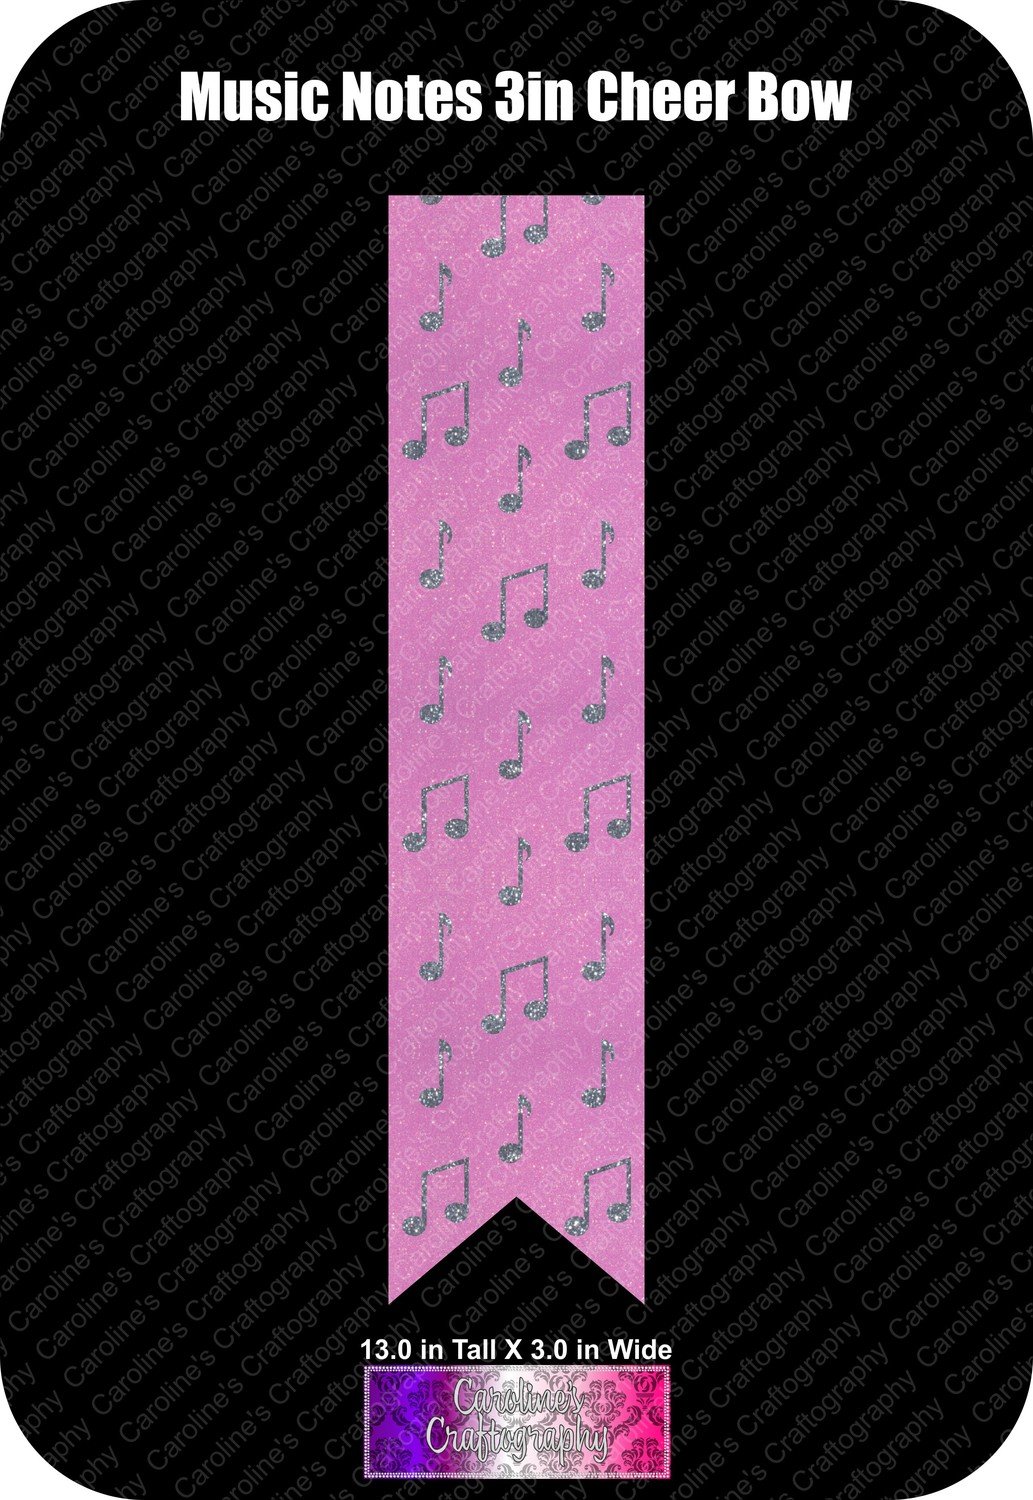 Music Notes 3in Cheer Bow Vinyl